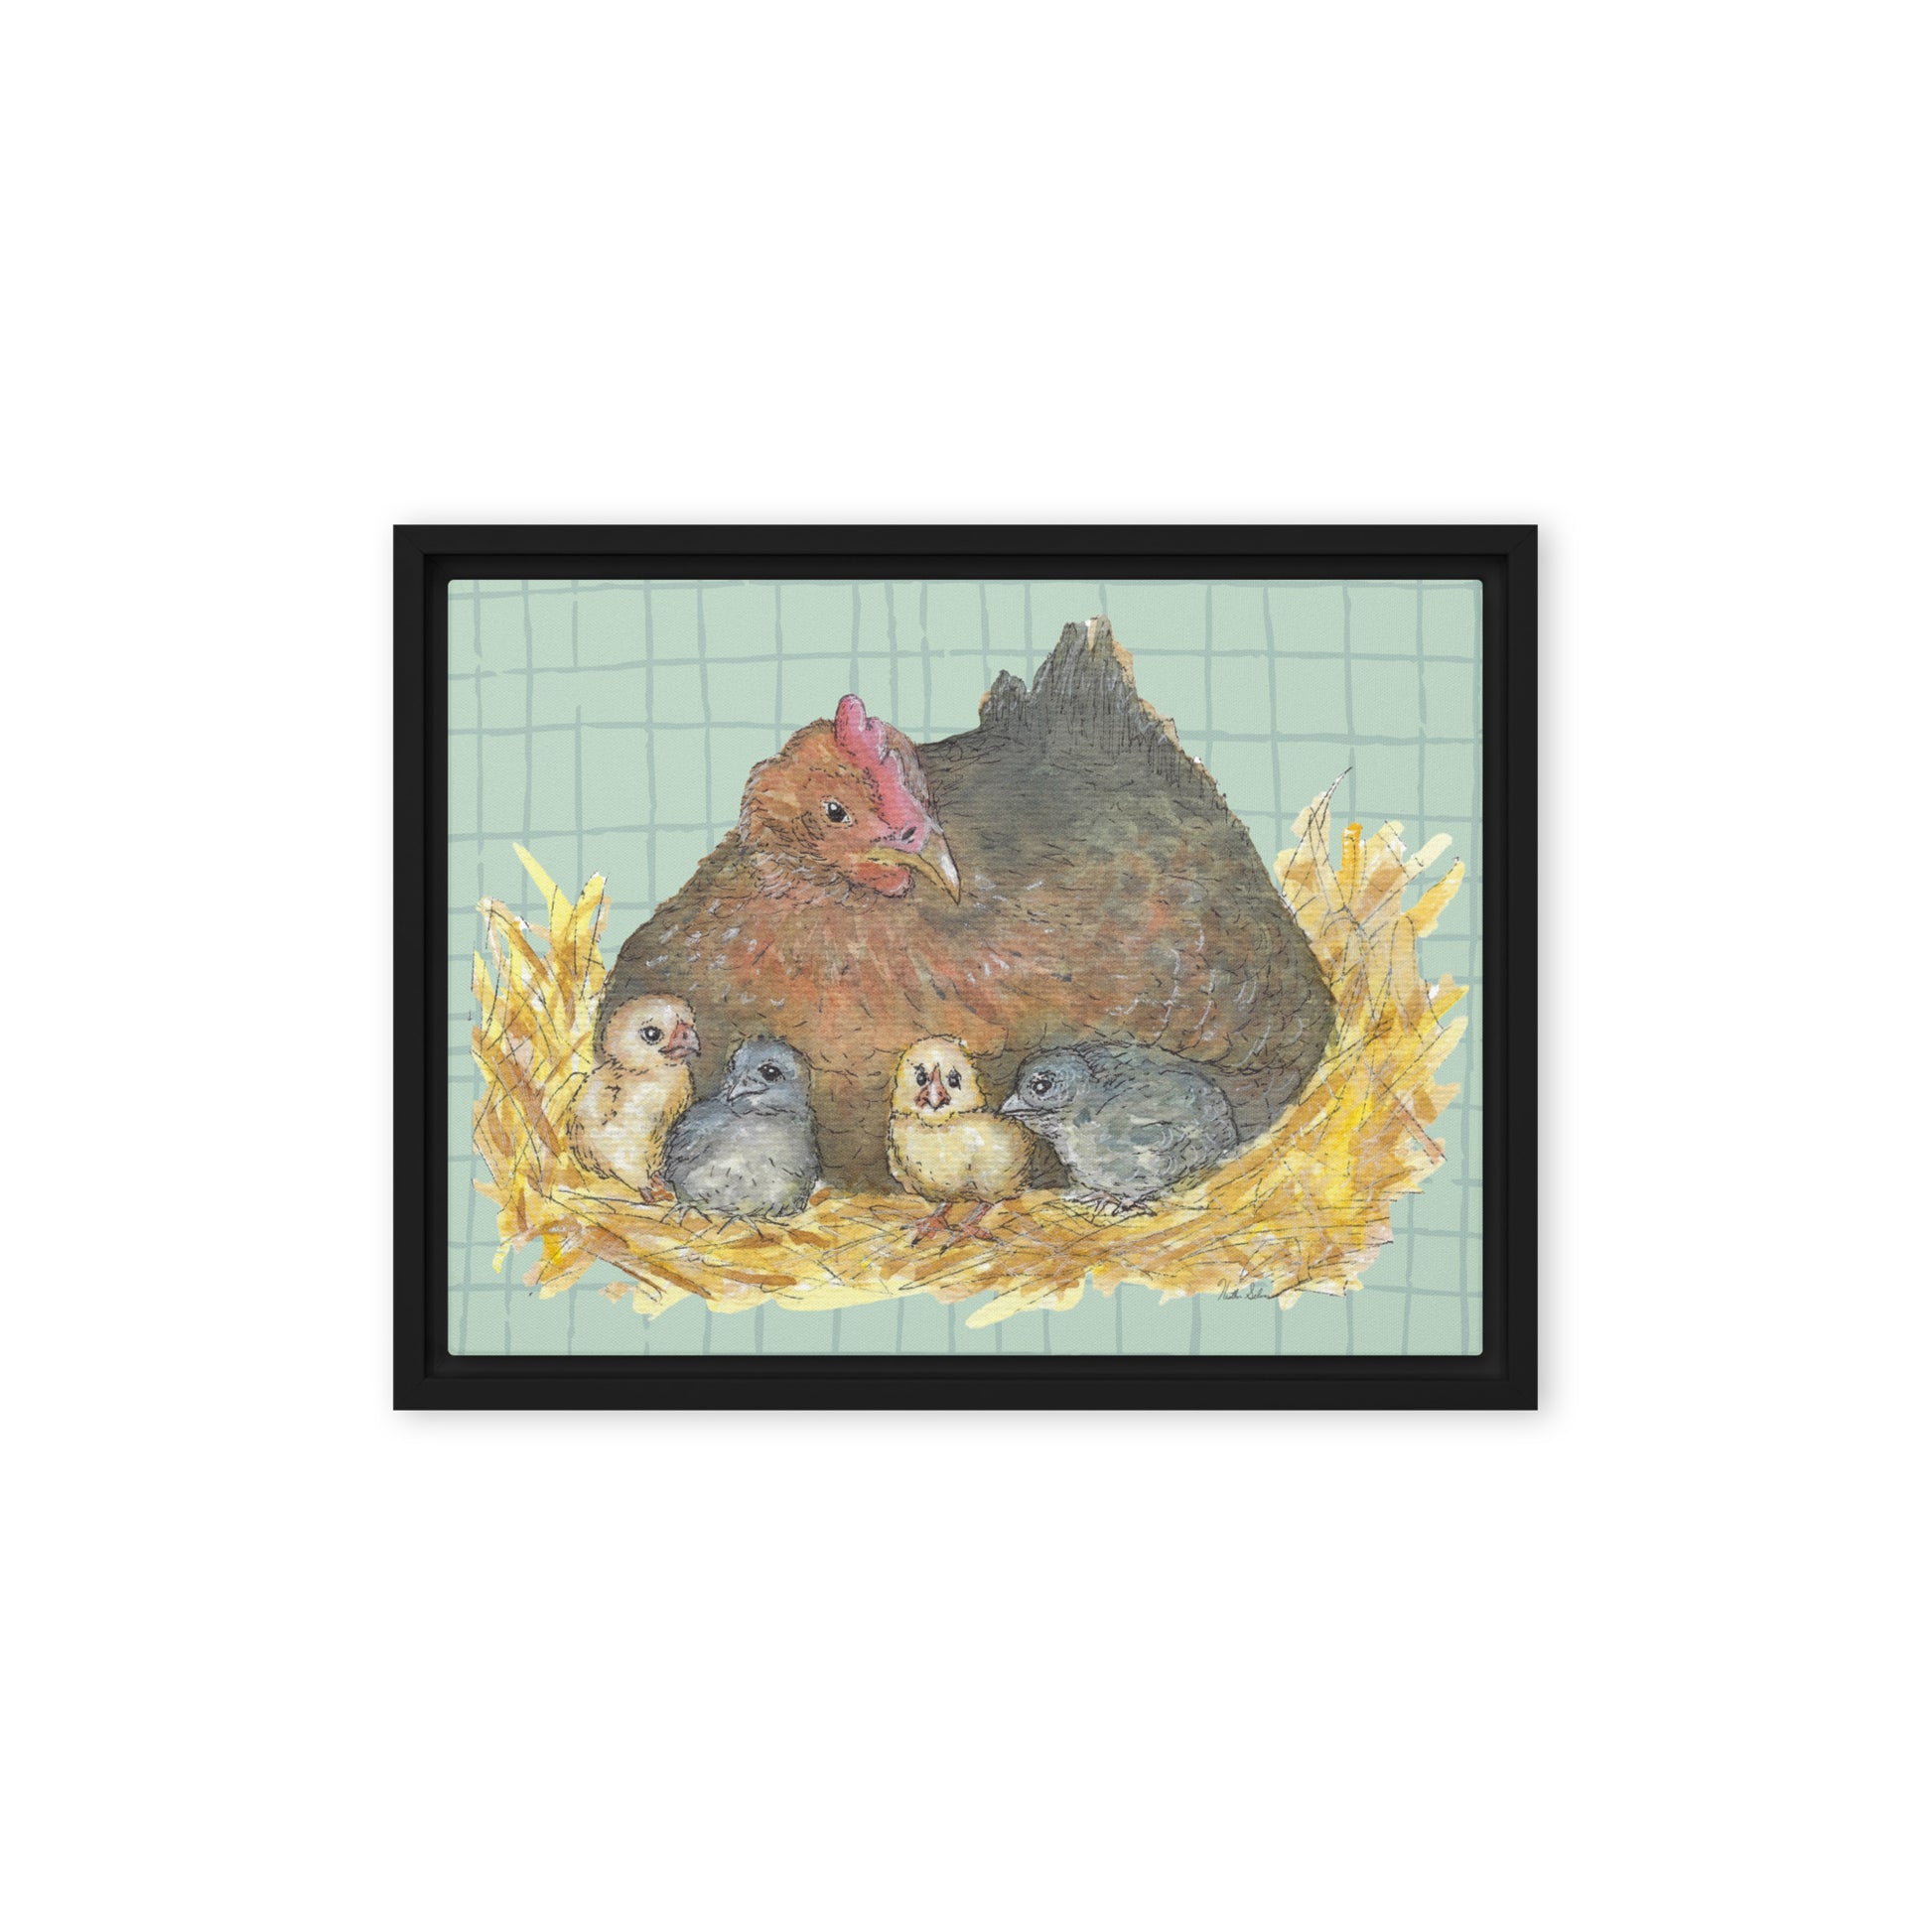 9 by 12 inch Mother Hen Floating Frame Canvas Wall Art. Heather Silver's watercolor painting, Mother Hen, with a green crosshatched background, printed on a stretched canvas and framed with a dark black pine frame. Hanging hardware included.